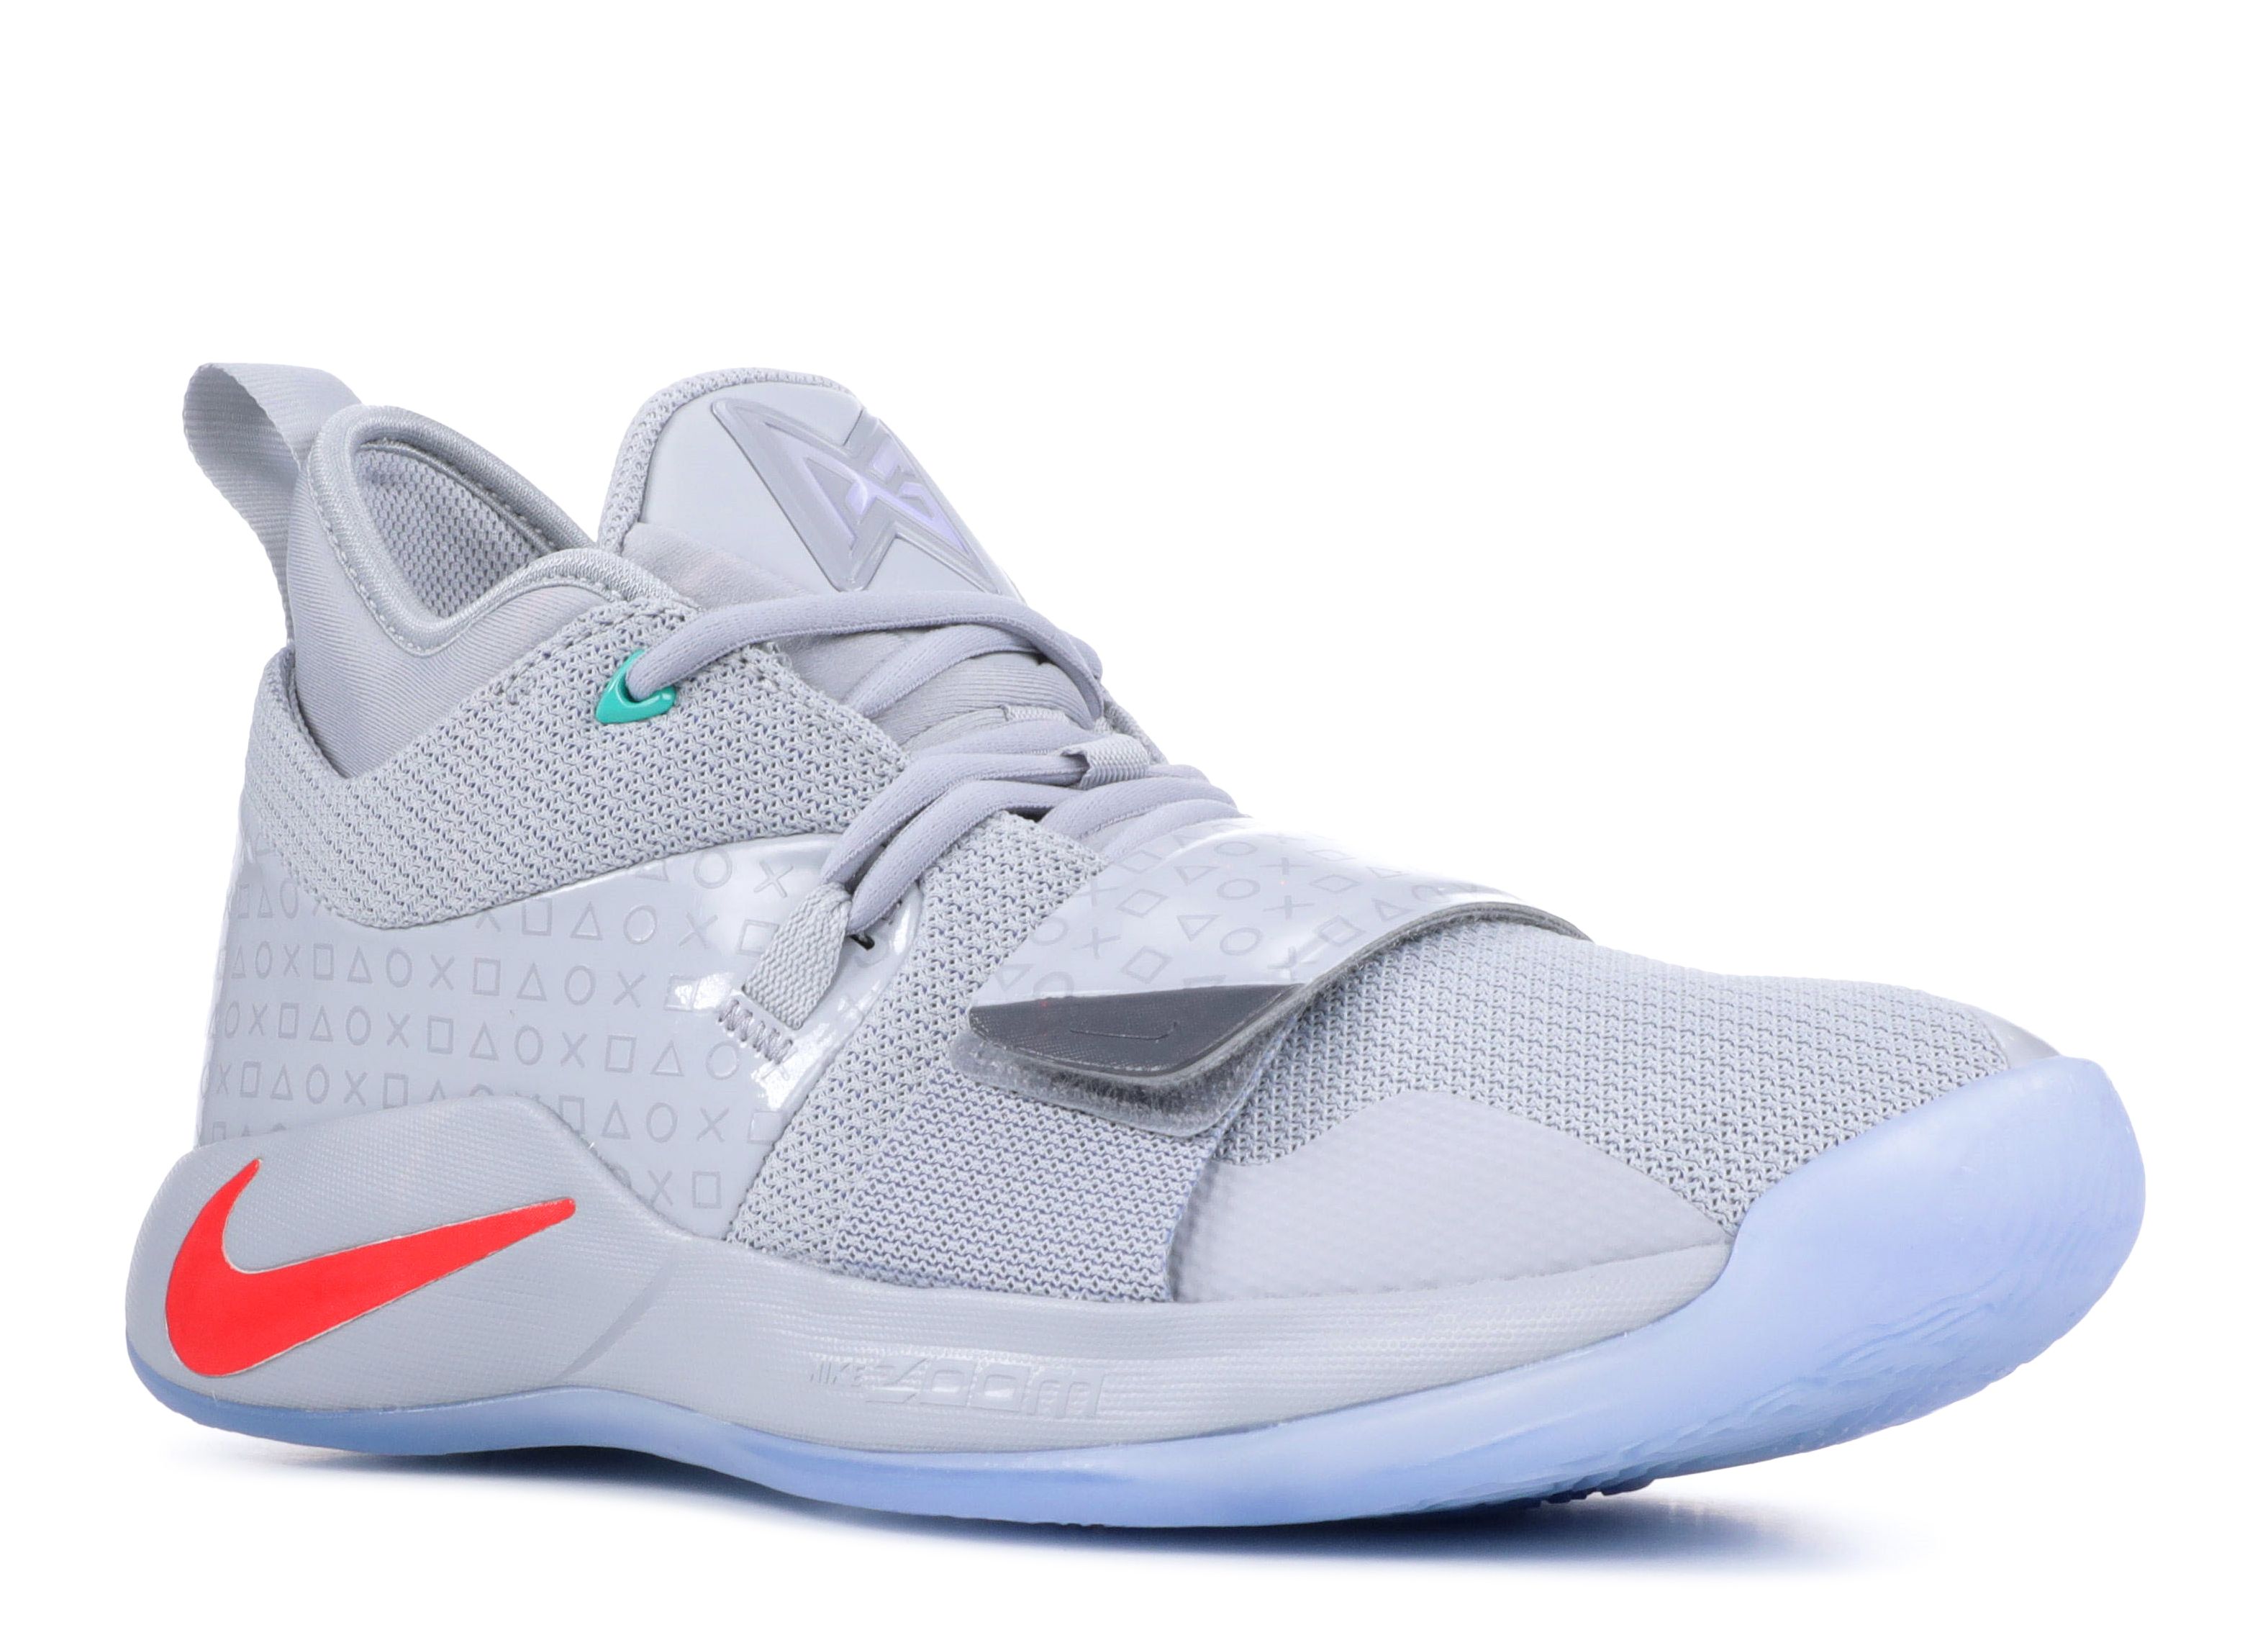 pg 2.5 size 14